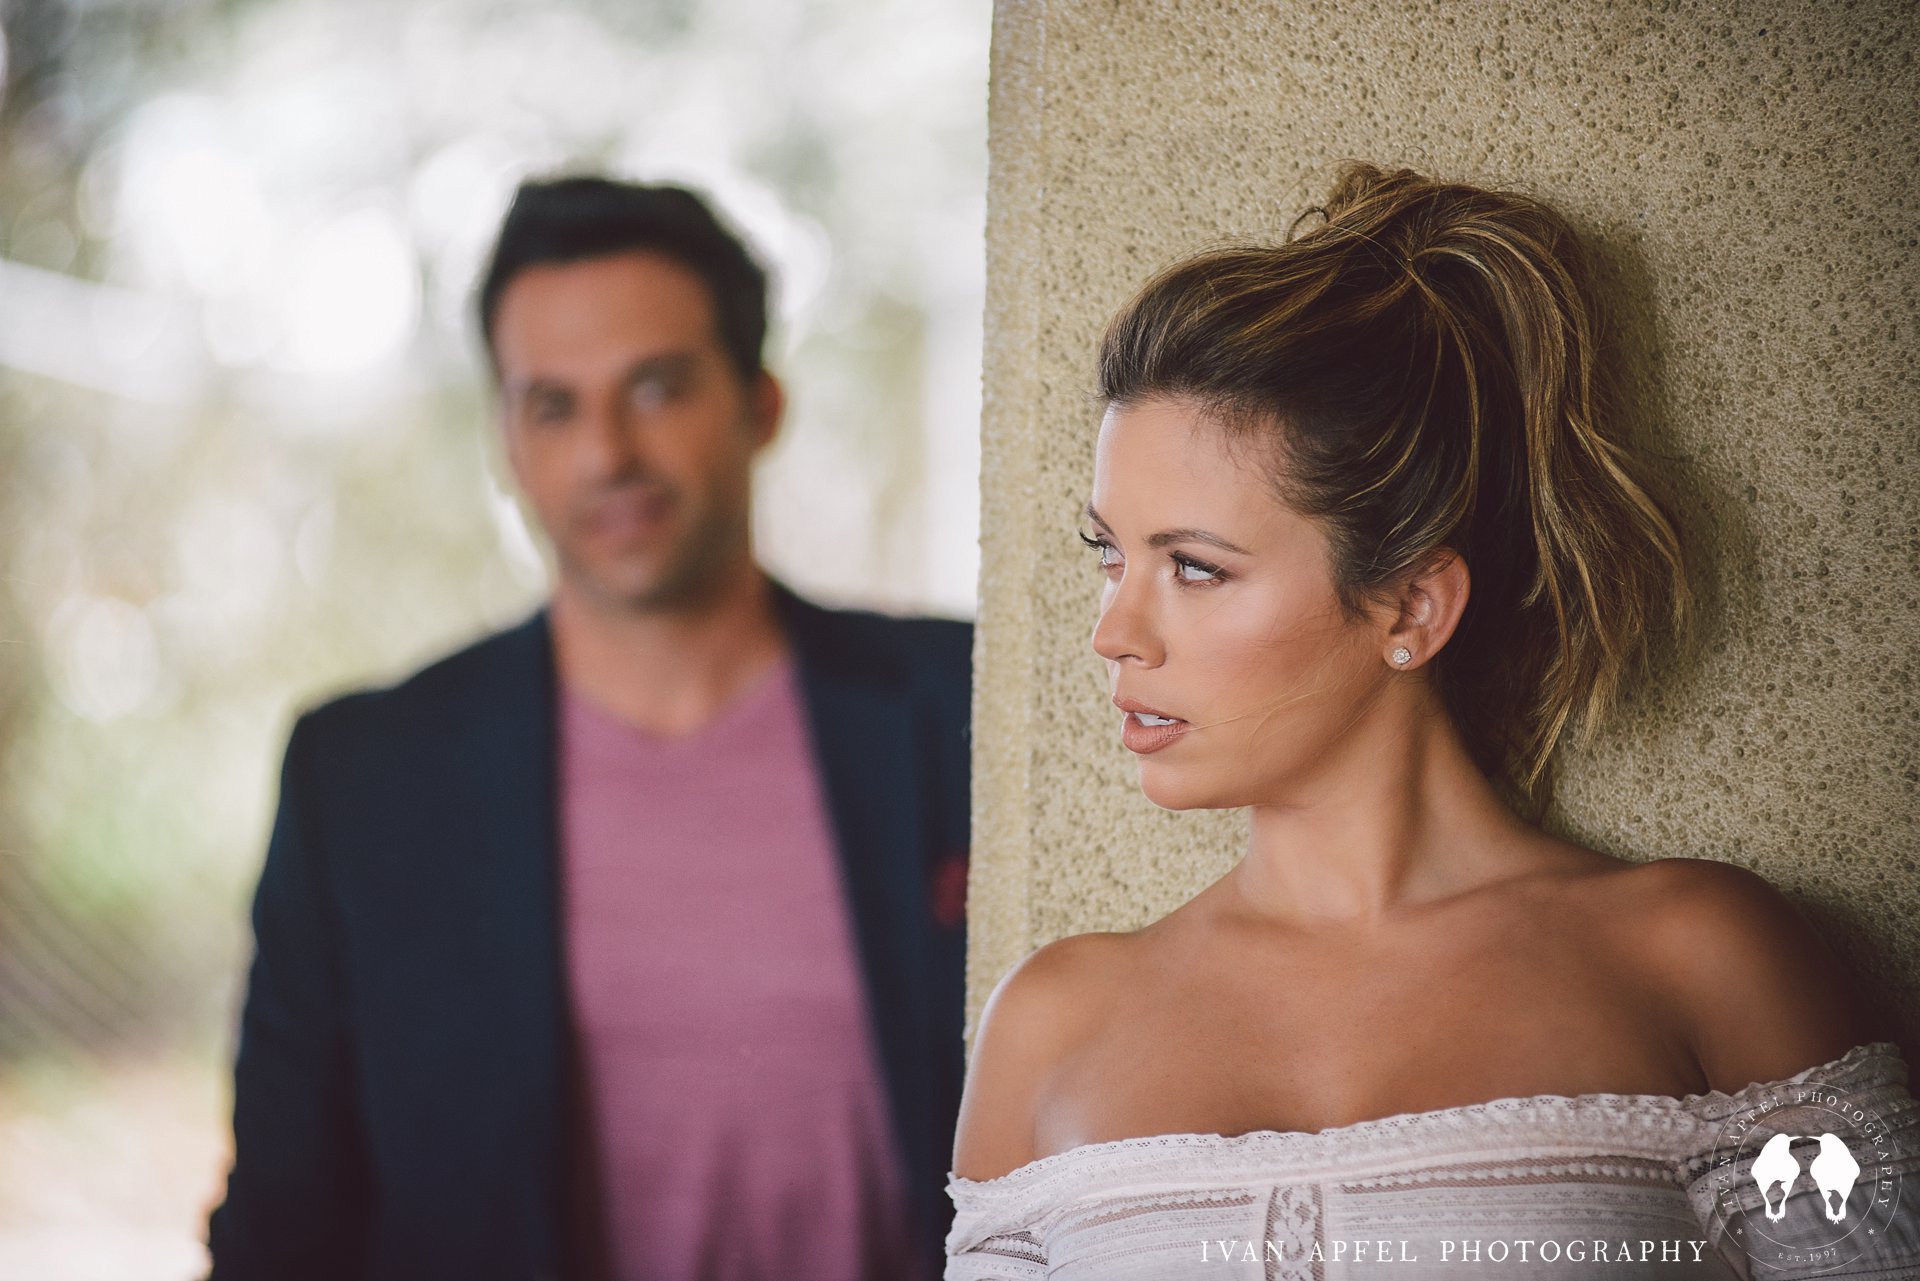 ximena duque and jay adkins engagement session ivan apfel photography miami_0033.jpg